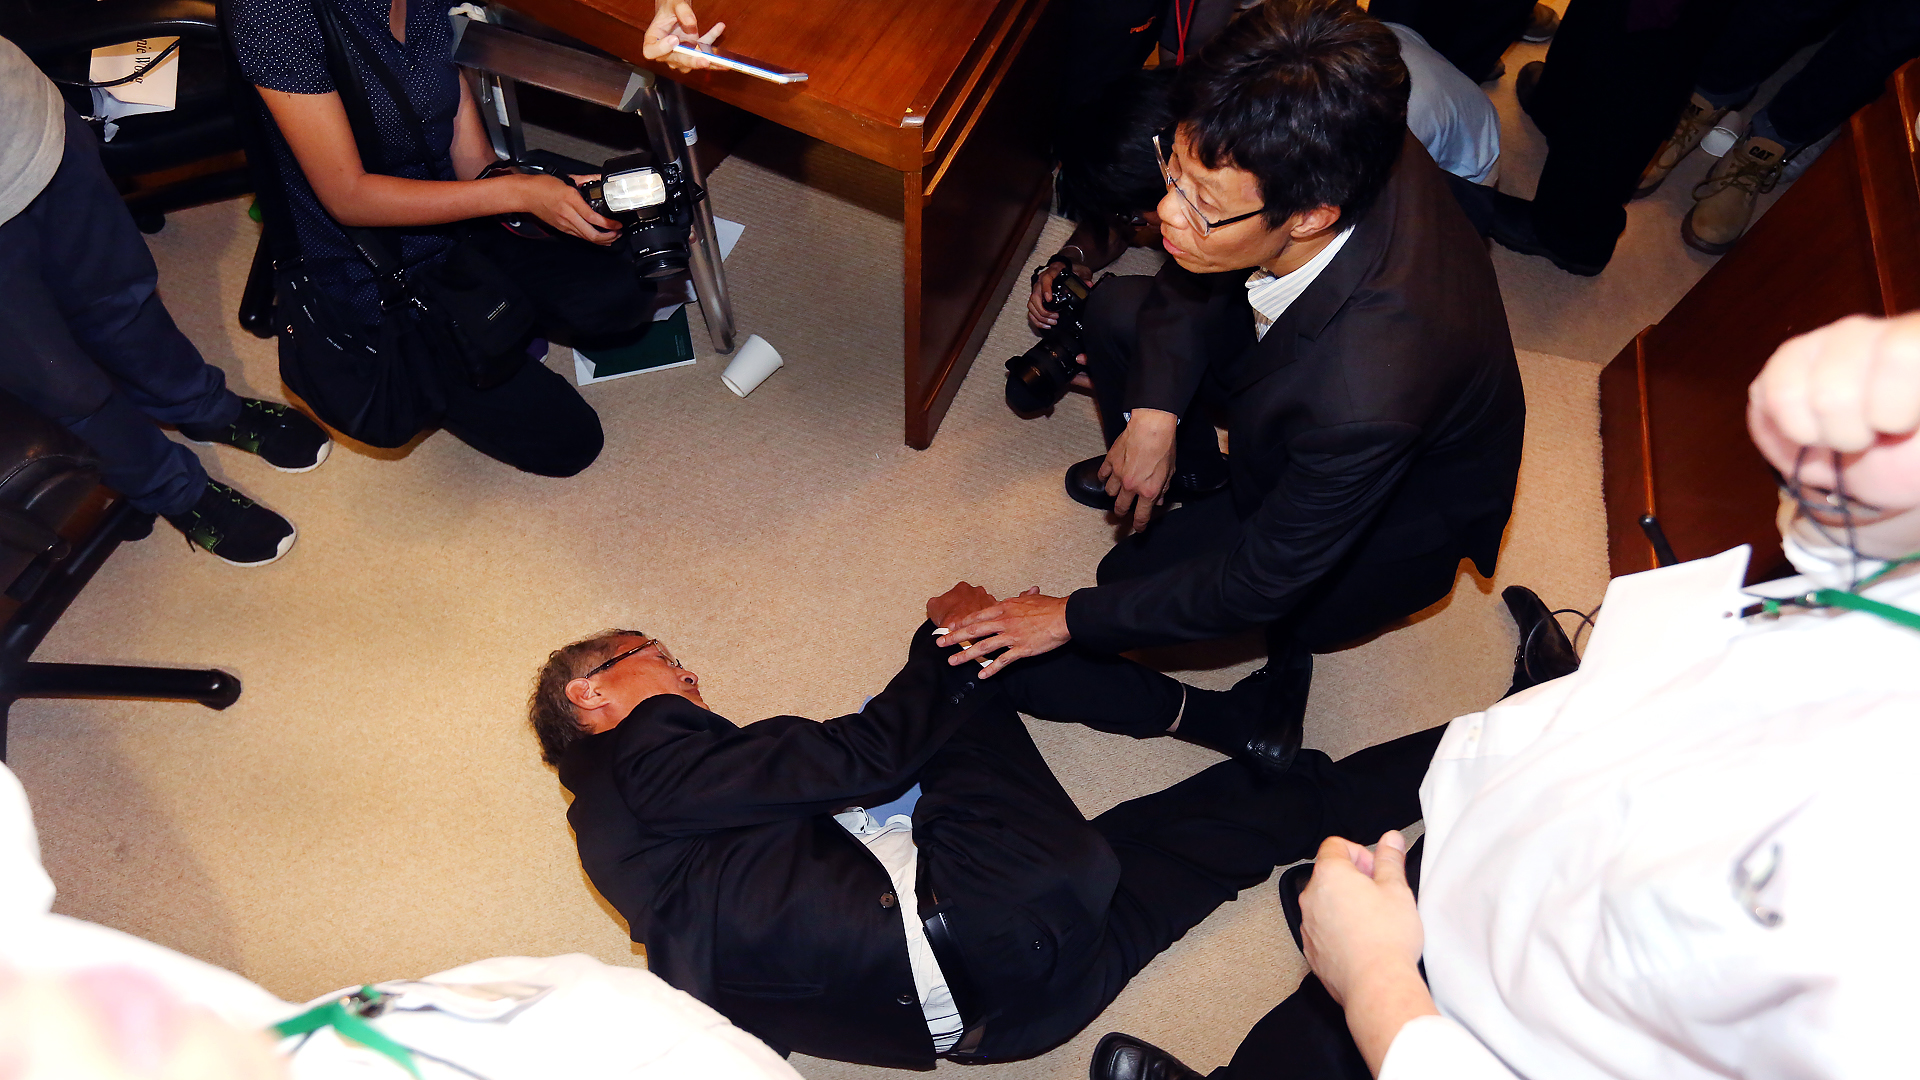 Lo Chung-mau fell during the council meeting last Wednesday - but the reason why remains unclear. Photo: SCMP Pictures